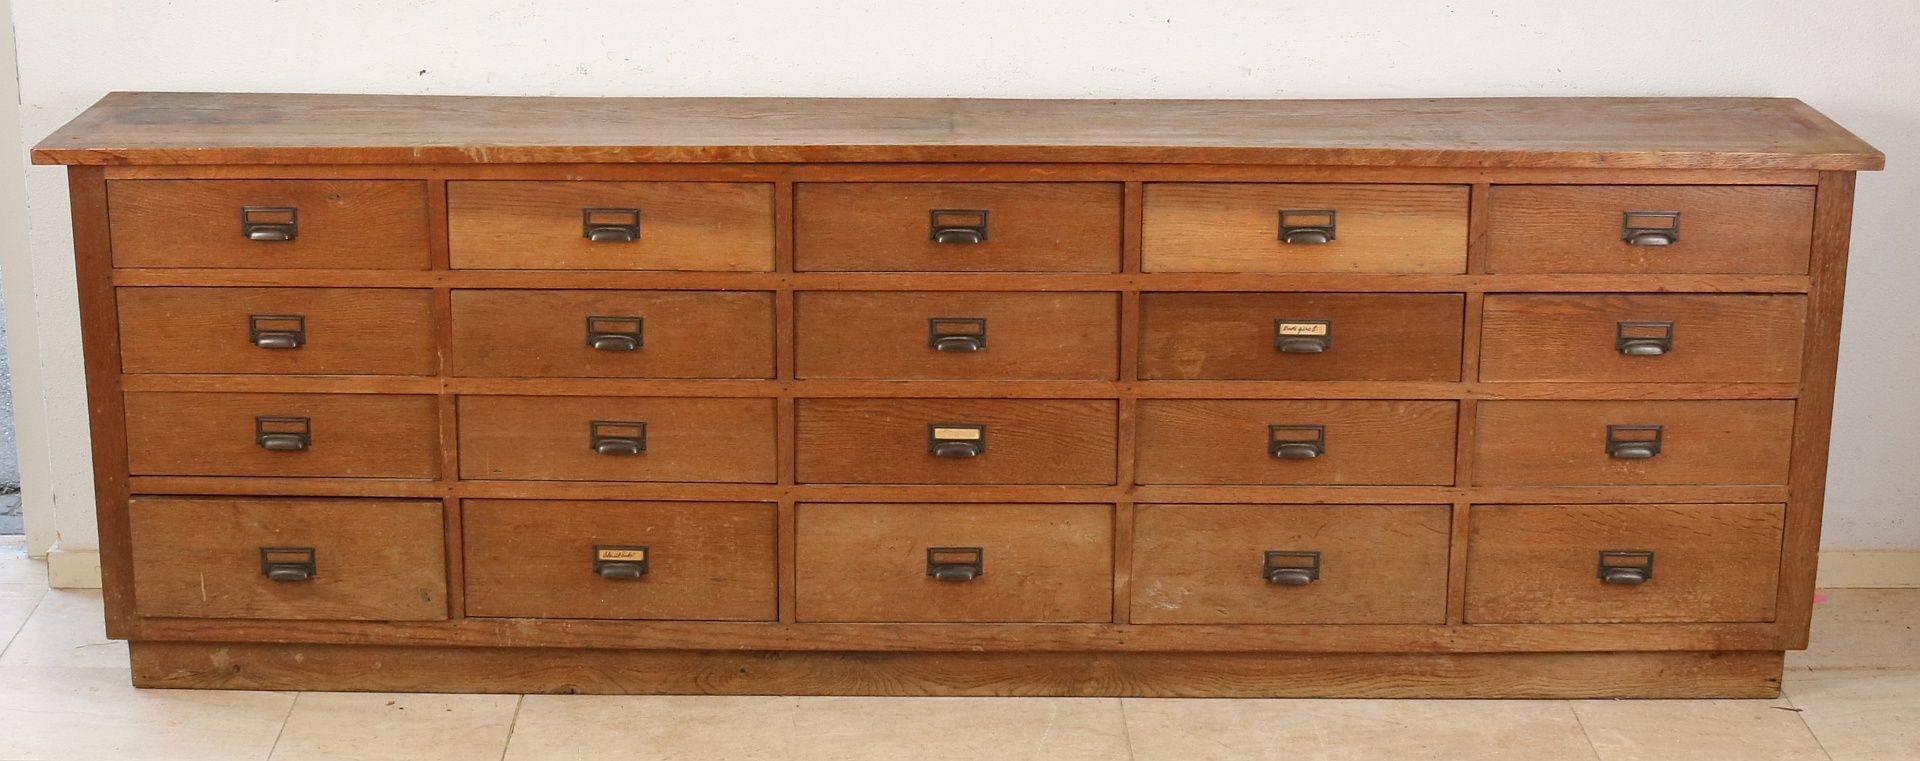 Antique apothecary drawer unit